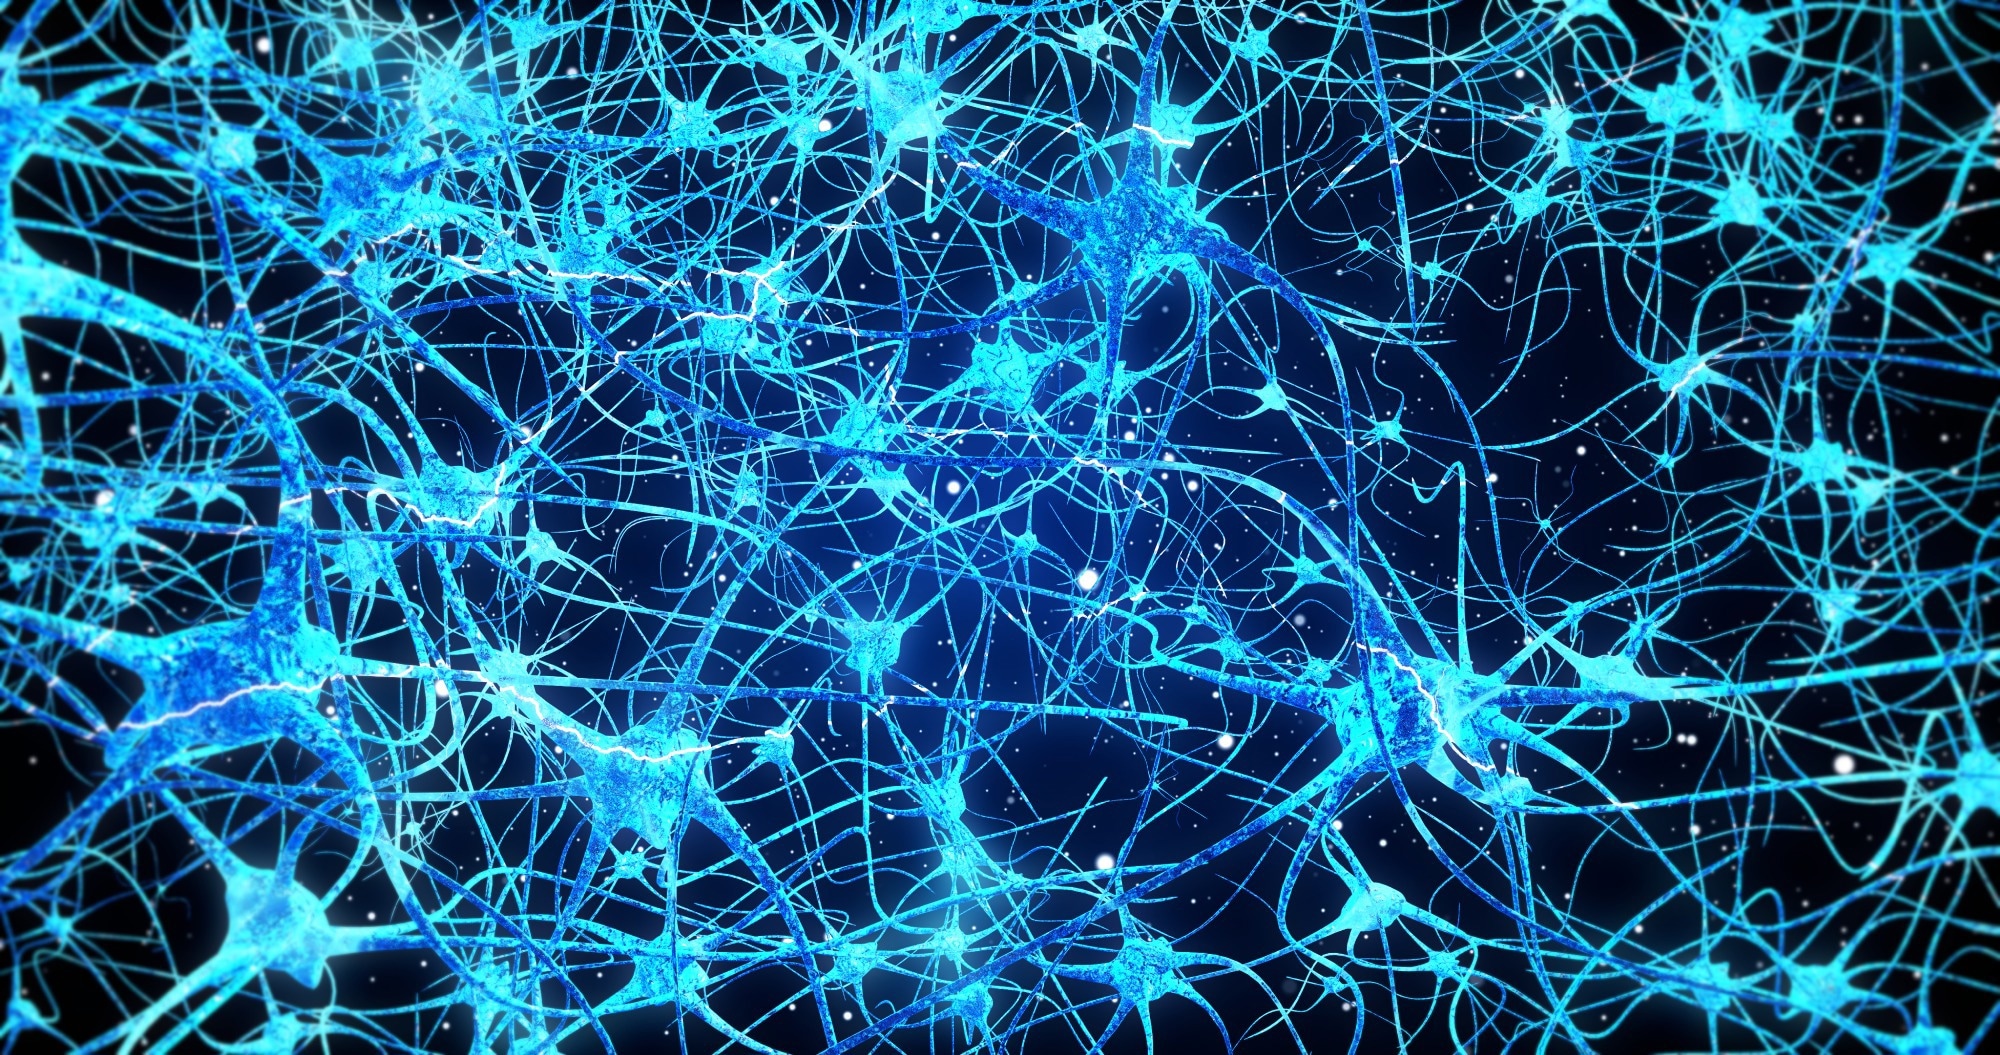 Study: Neuronal cell cycle reentry events in the aging brain are more prevalent in neurodegeneration and lead to cellular senescence. Image Credit: viktorov.pro / Shutterstock.com